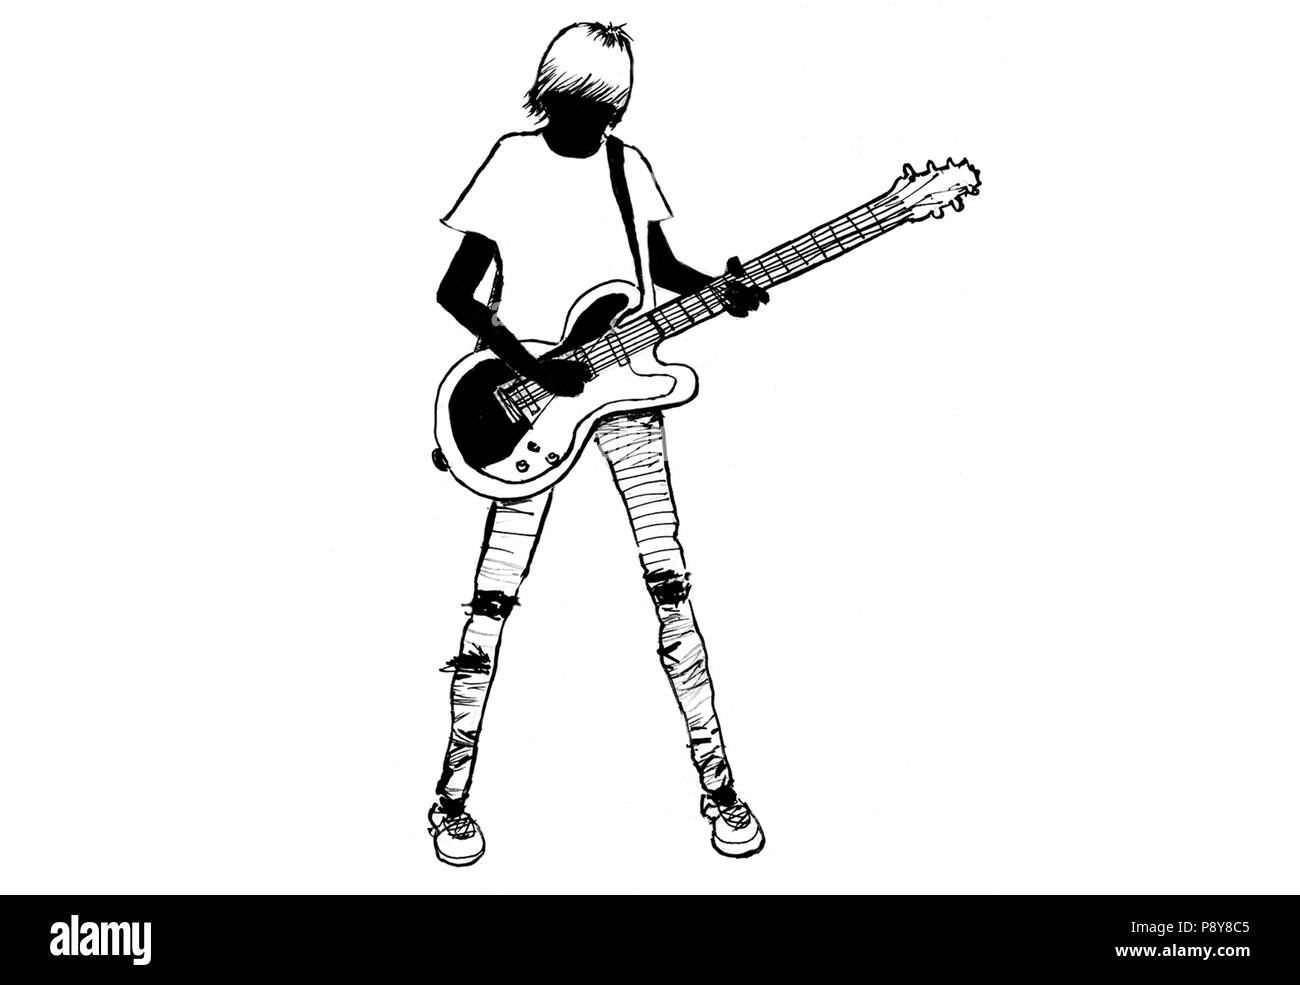 Ink drawing teen plays electric guitar Stock Photo